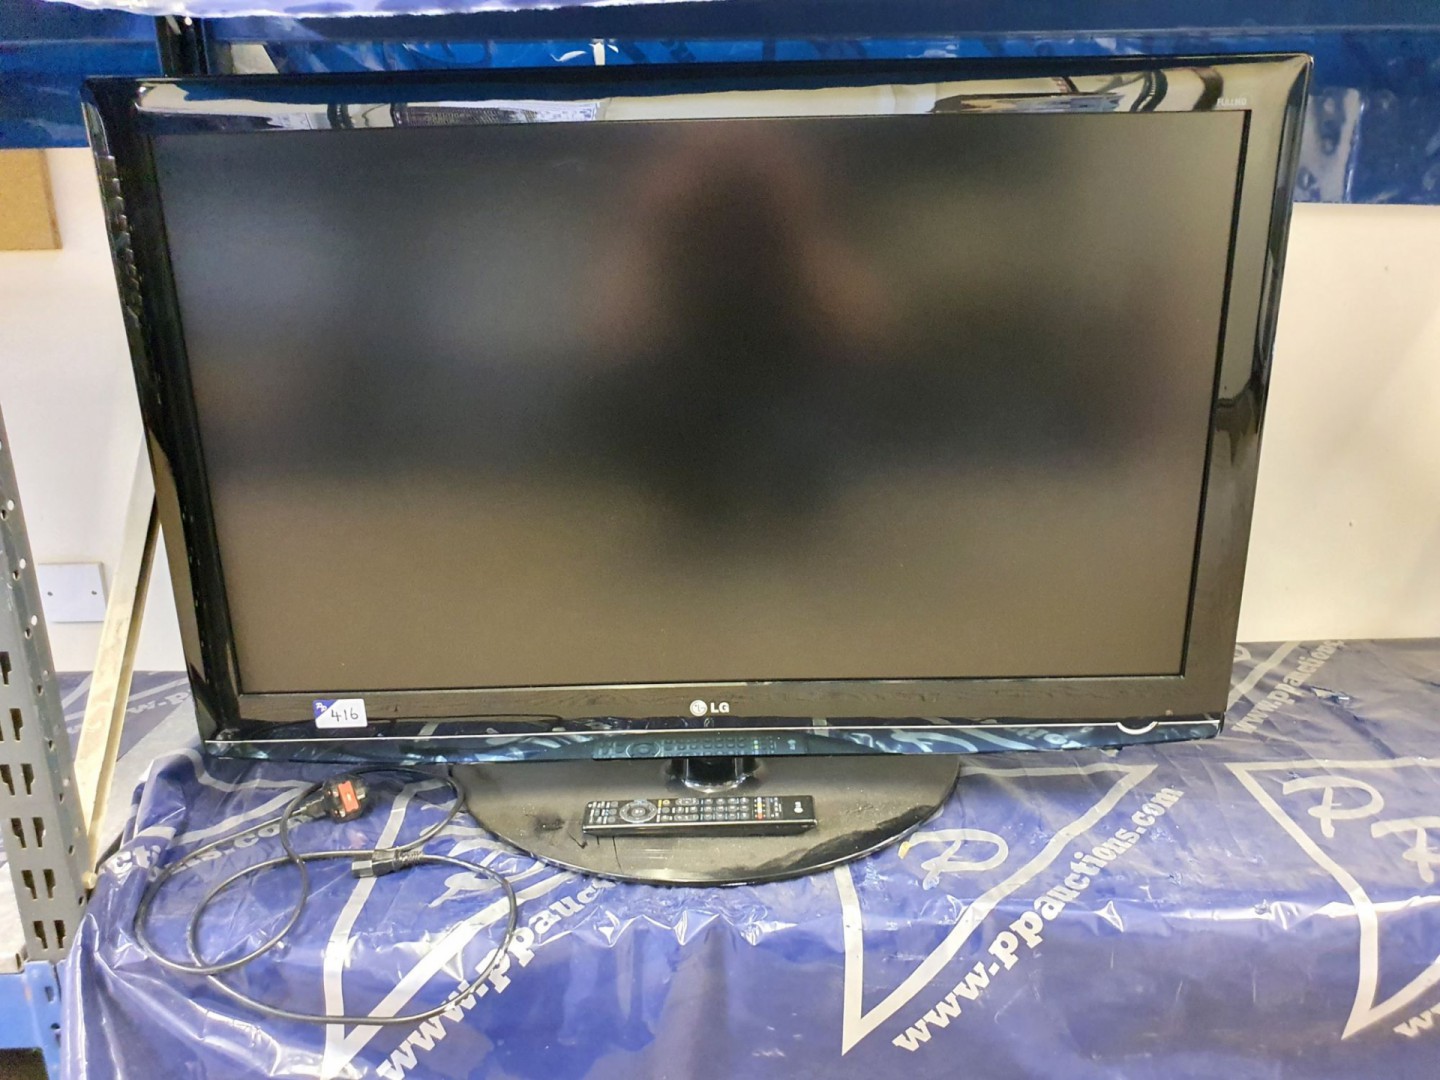 LG 42LG5020 LCD TV on stand with remote